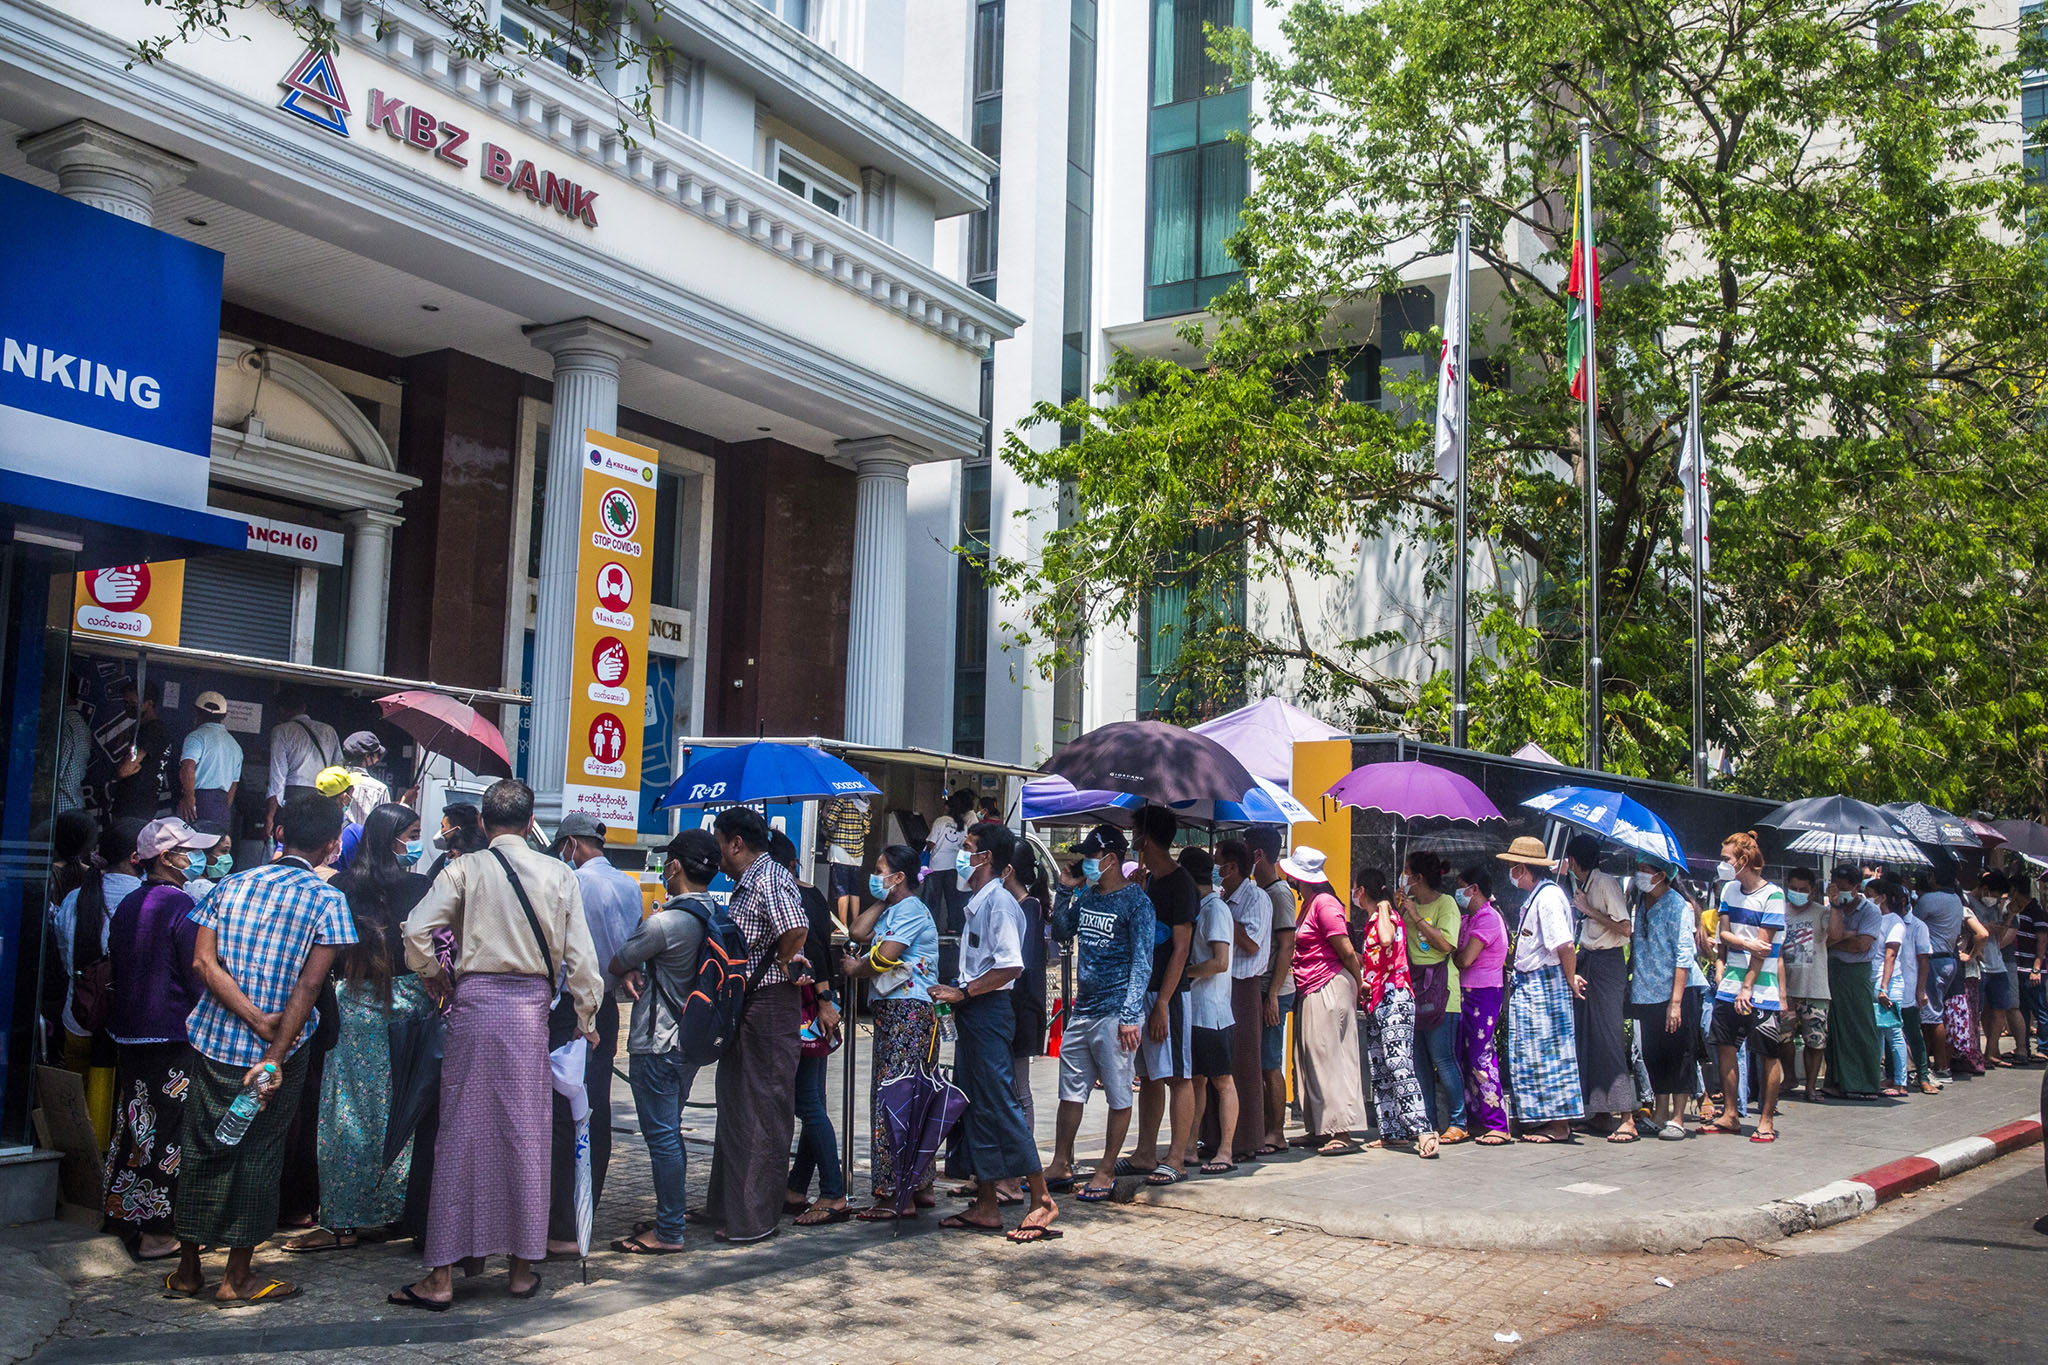 A line to withdraw cash from a bank in Yangon, Myanmar, March 22, 2021. Myanmar has been crippled by a cash shortage since the military seized power six months ago, plunging the Southeast Asian nation into a financial crisis. (The New York Times)